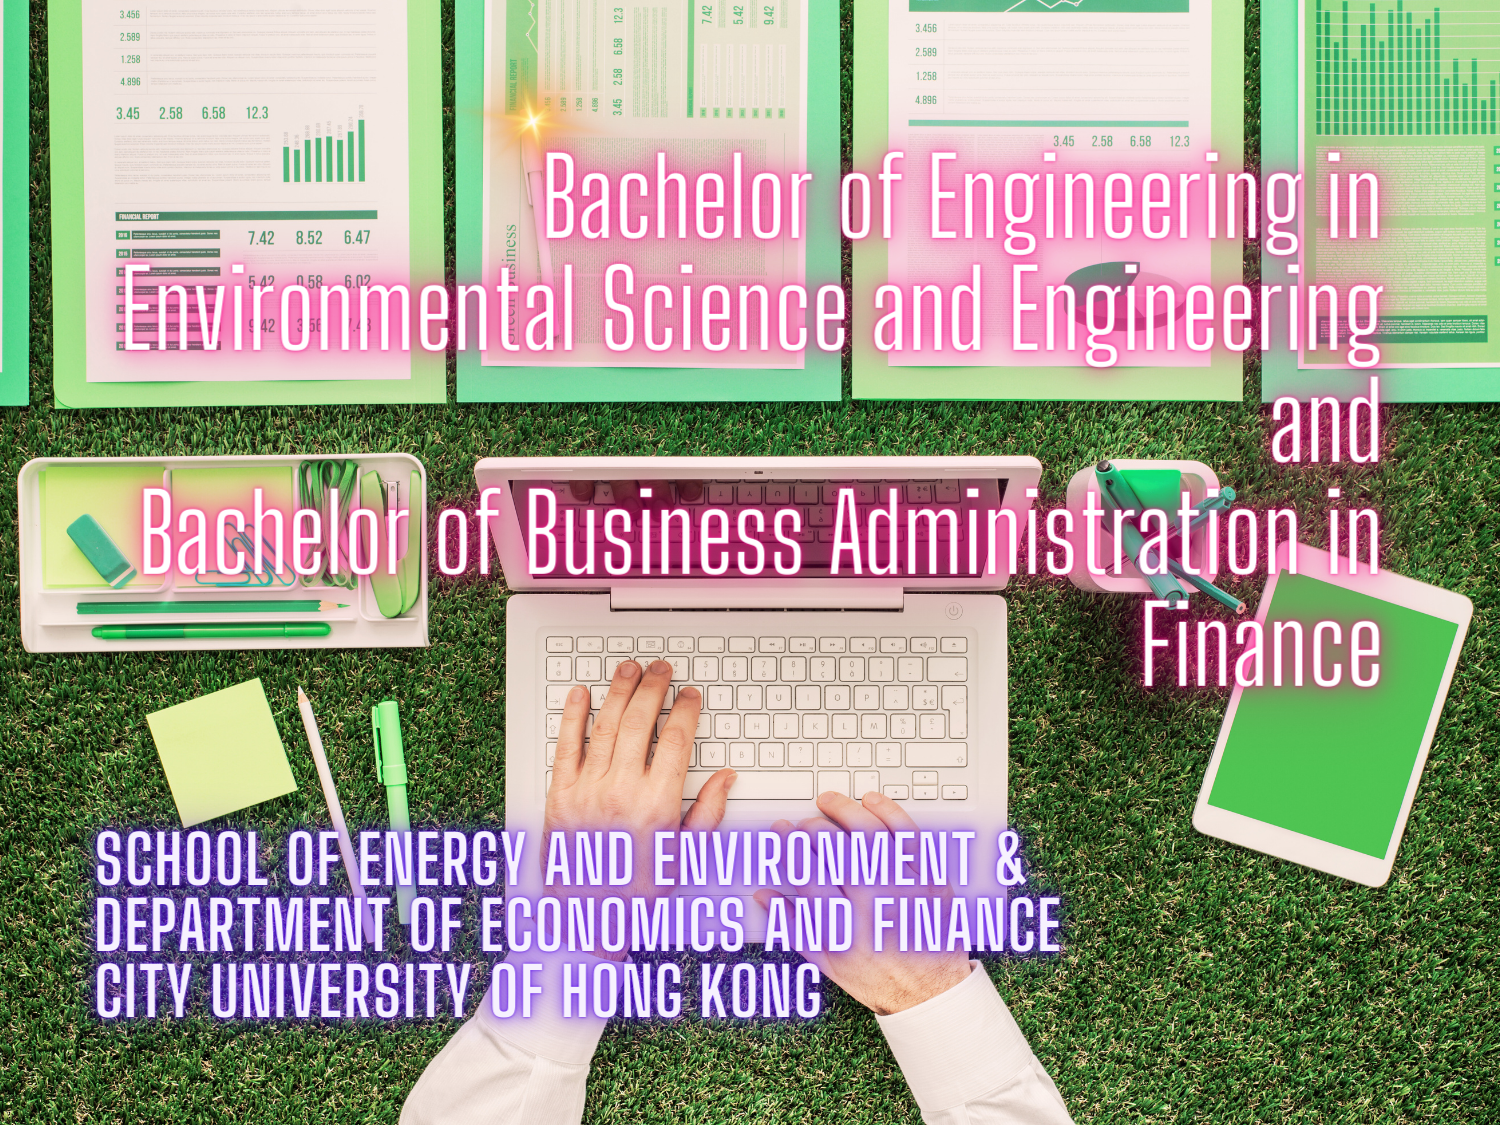 Double Degree Programme - Bachelor of Engineering in Environmental Science and Engineering and Bachelor of Business Administration in Finance